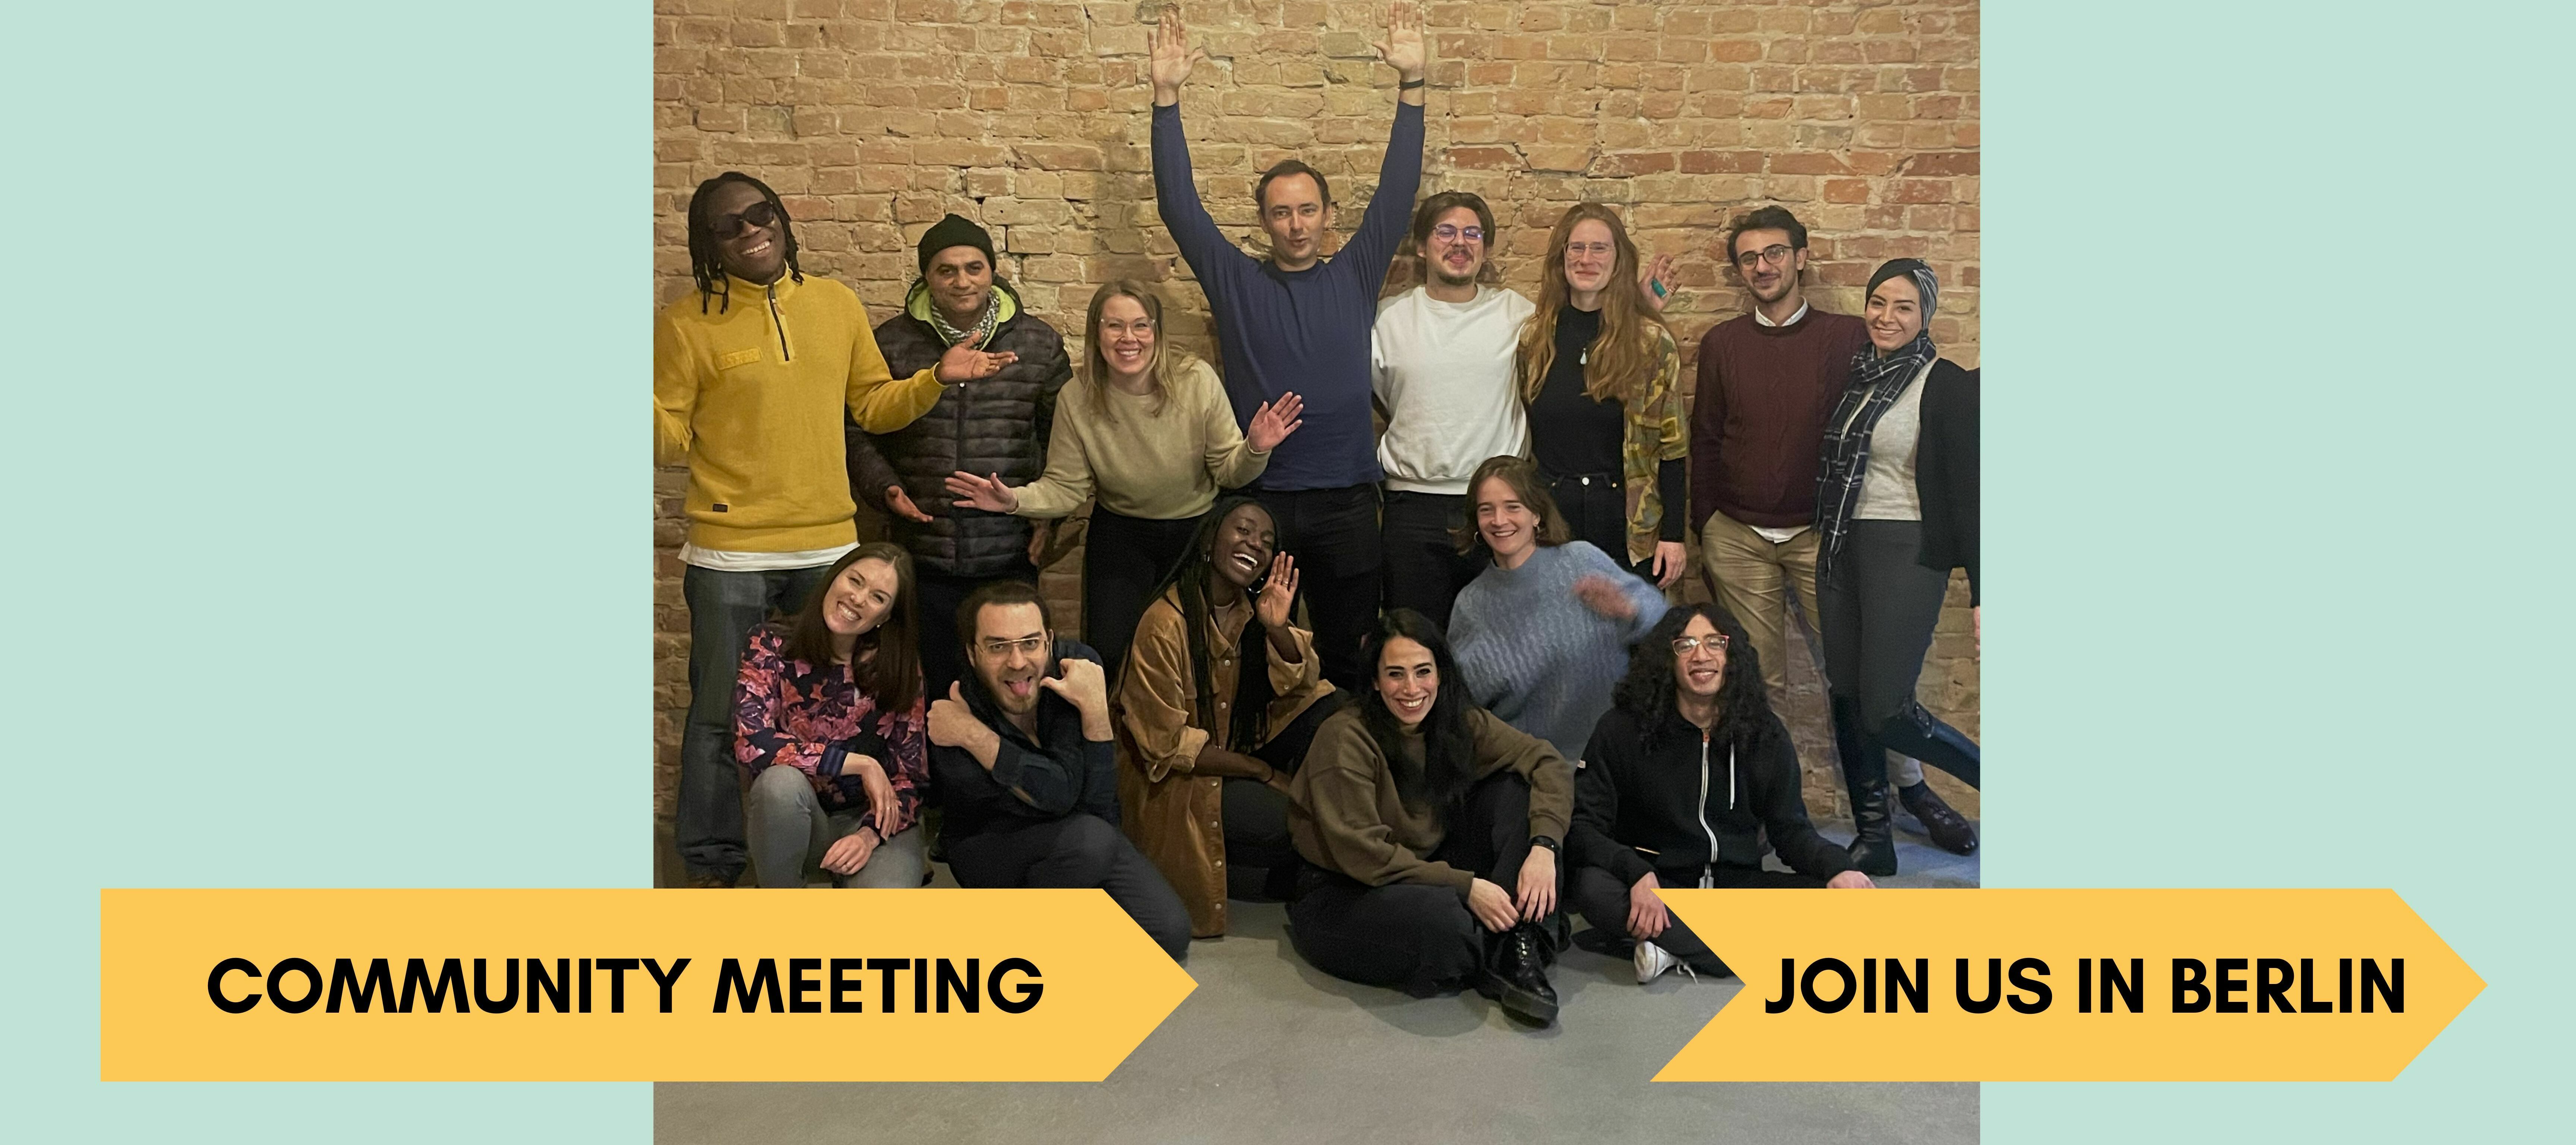 Join our Community Meeting in Berlin - 11.&12. November